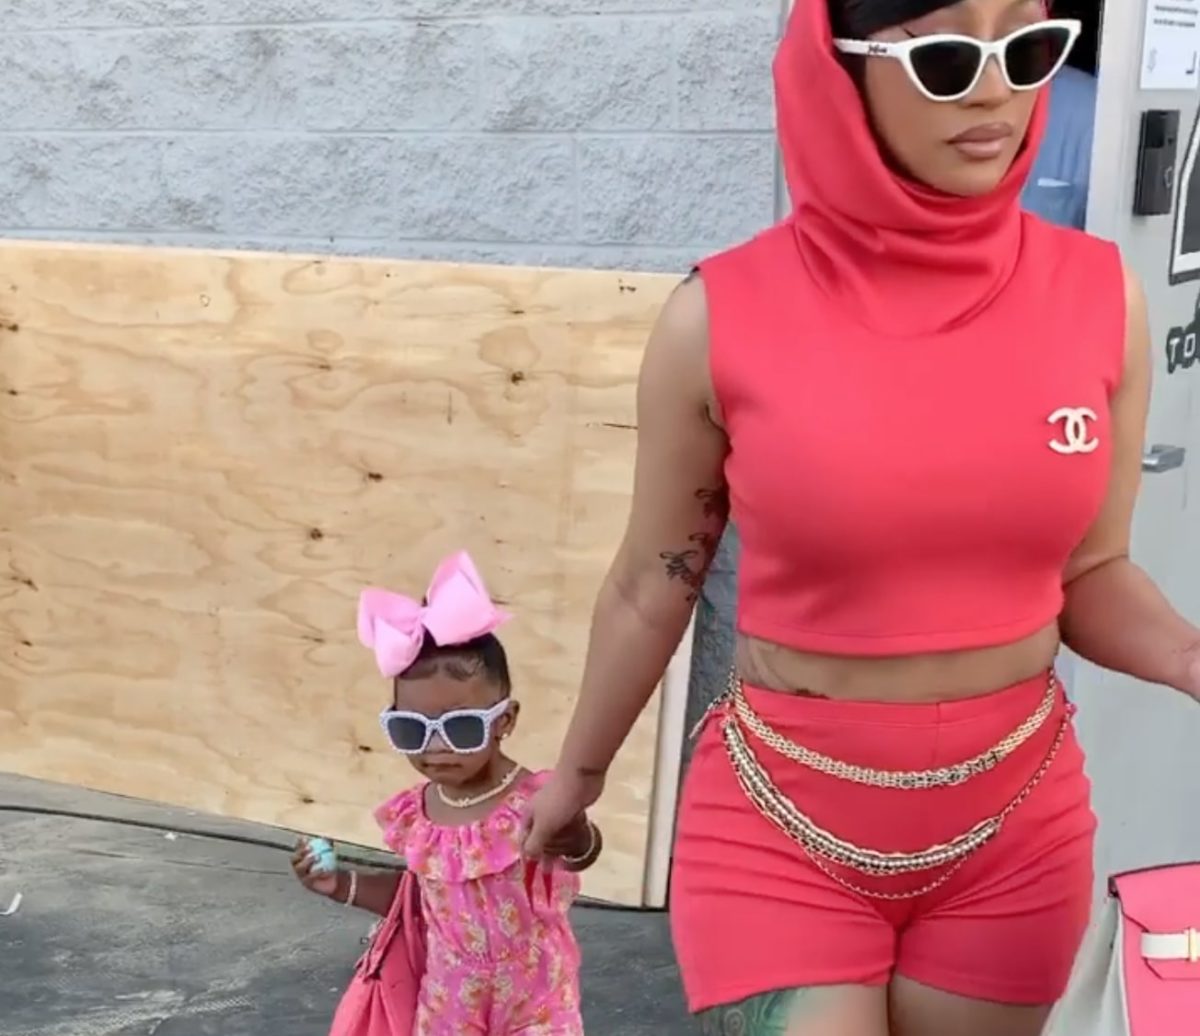 cardi b on not allowing her 2-year-old to listen to 'wap'